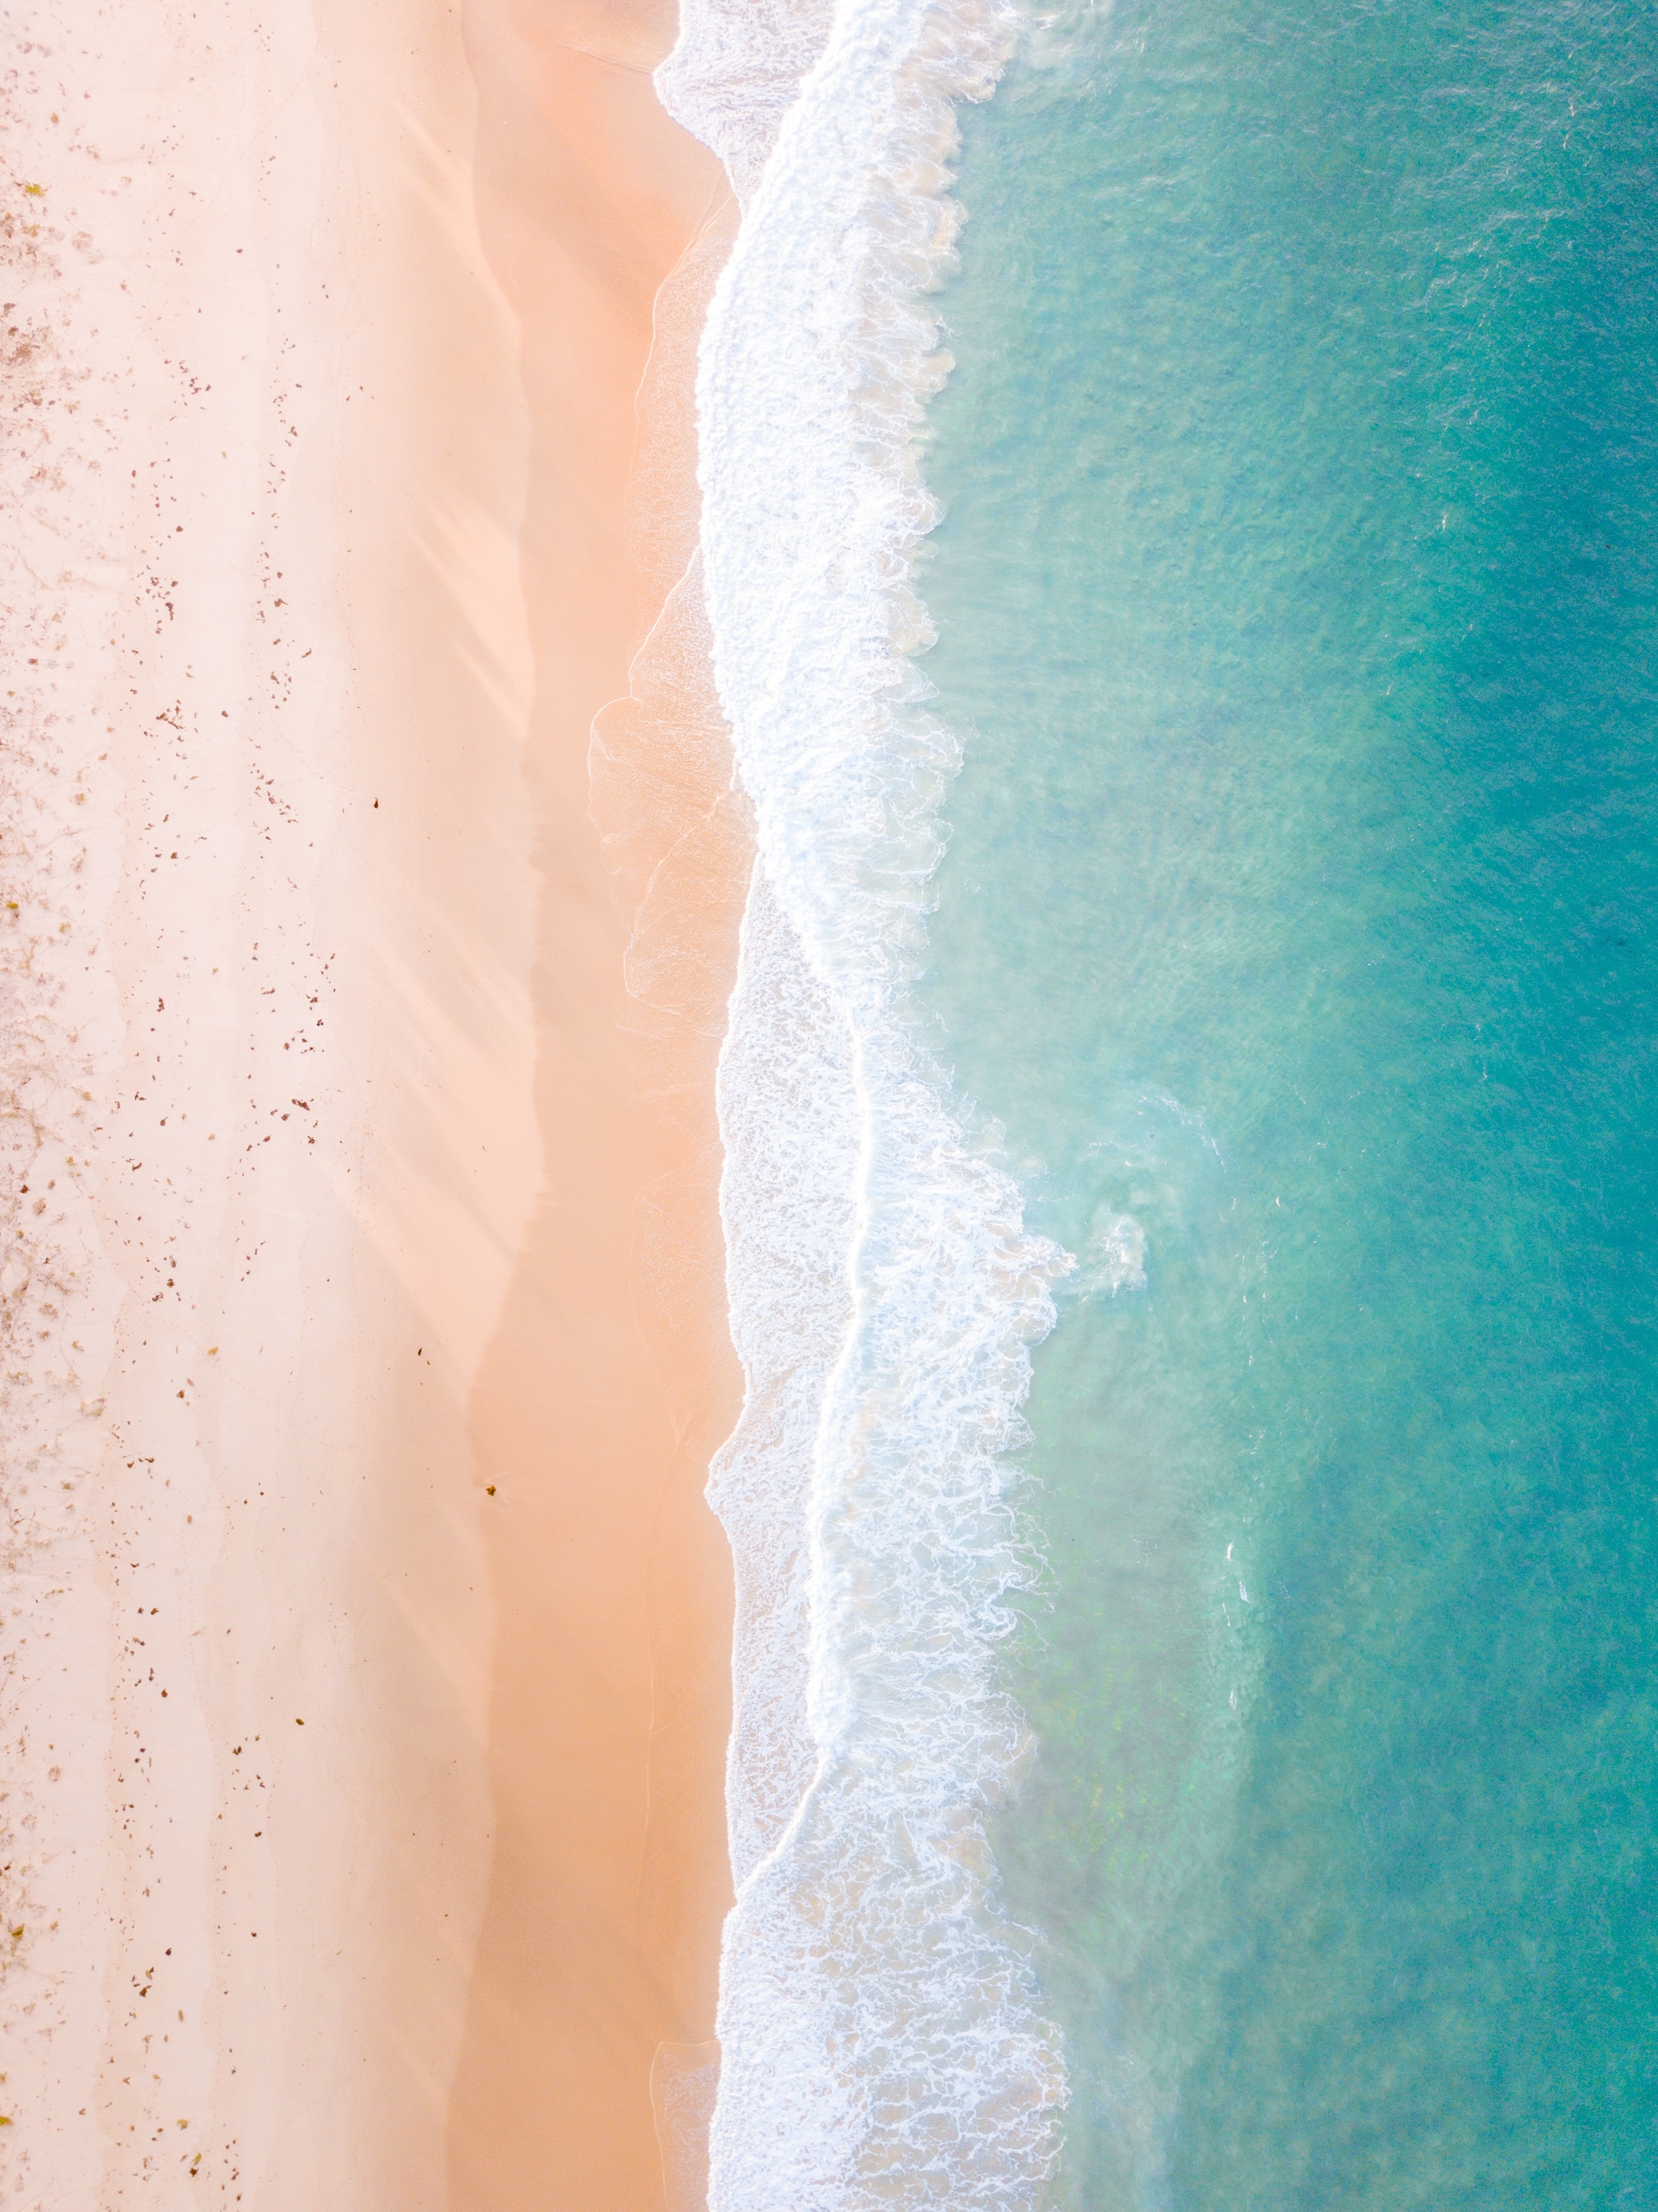 beach, sea, view from above, nature HD Wallpaper for Phone